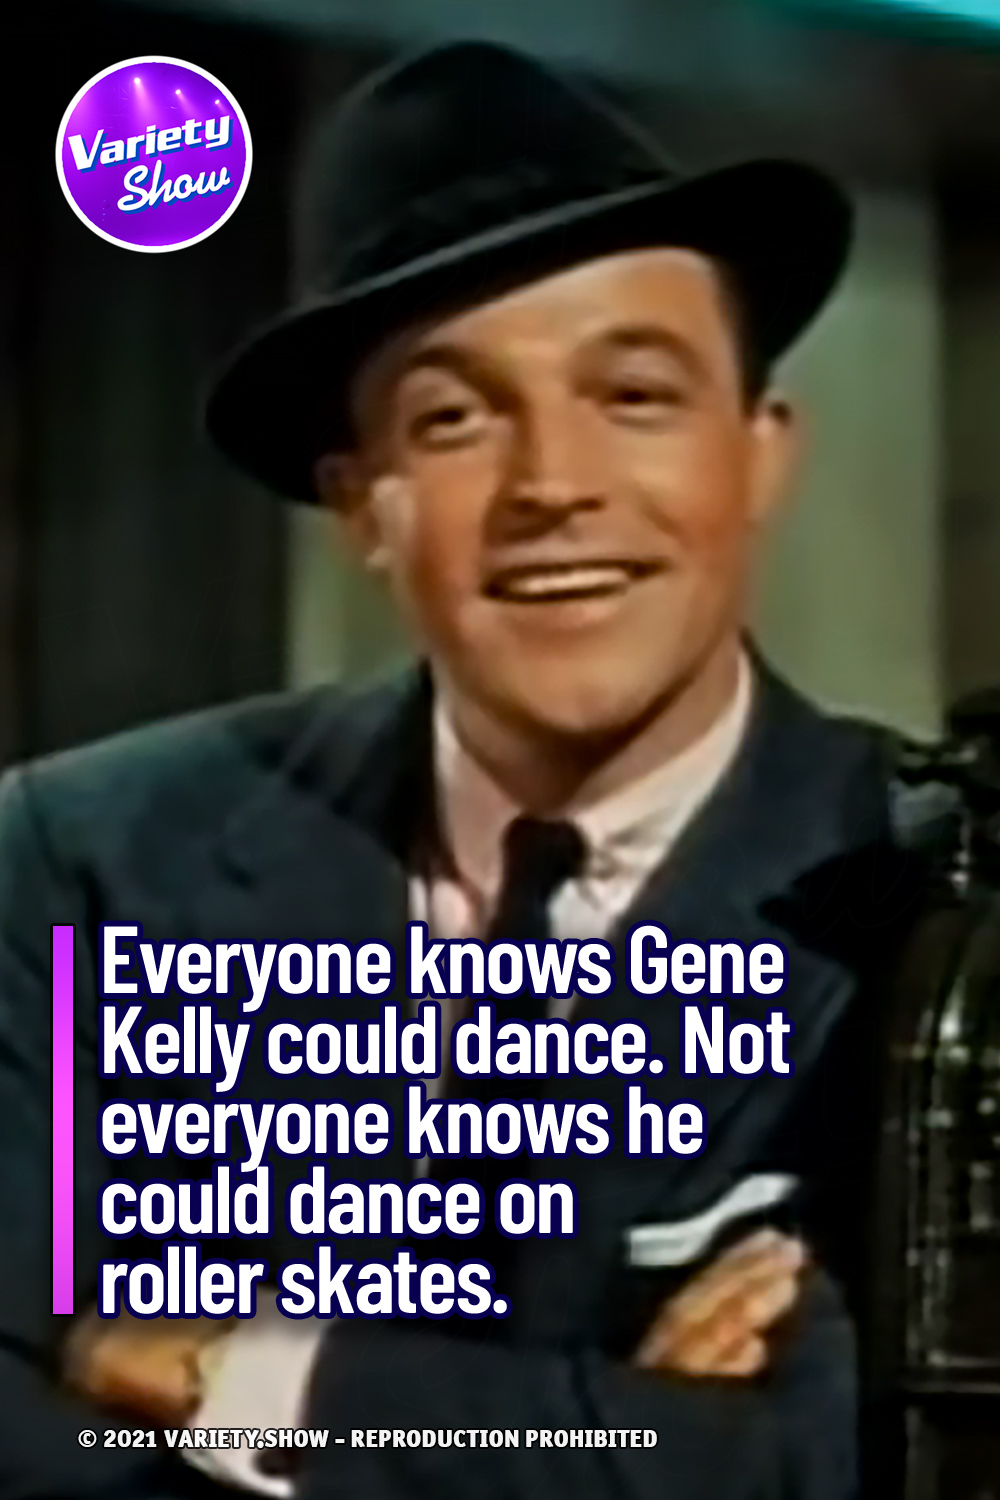 Everyone knows Gene Kelly could dance. Not everyone knows he could dance on roller skates.